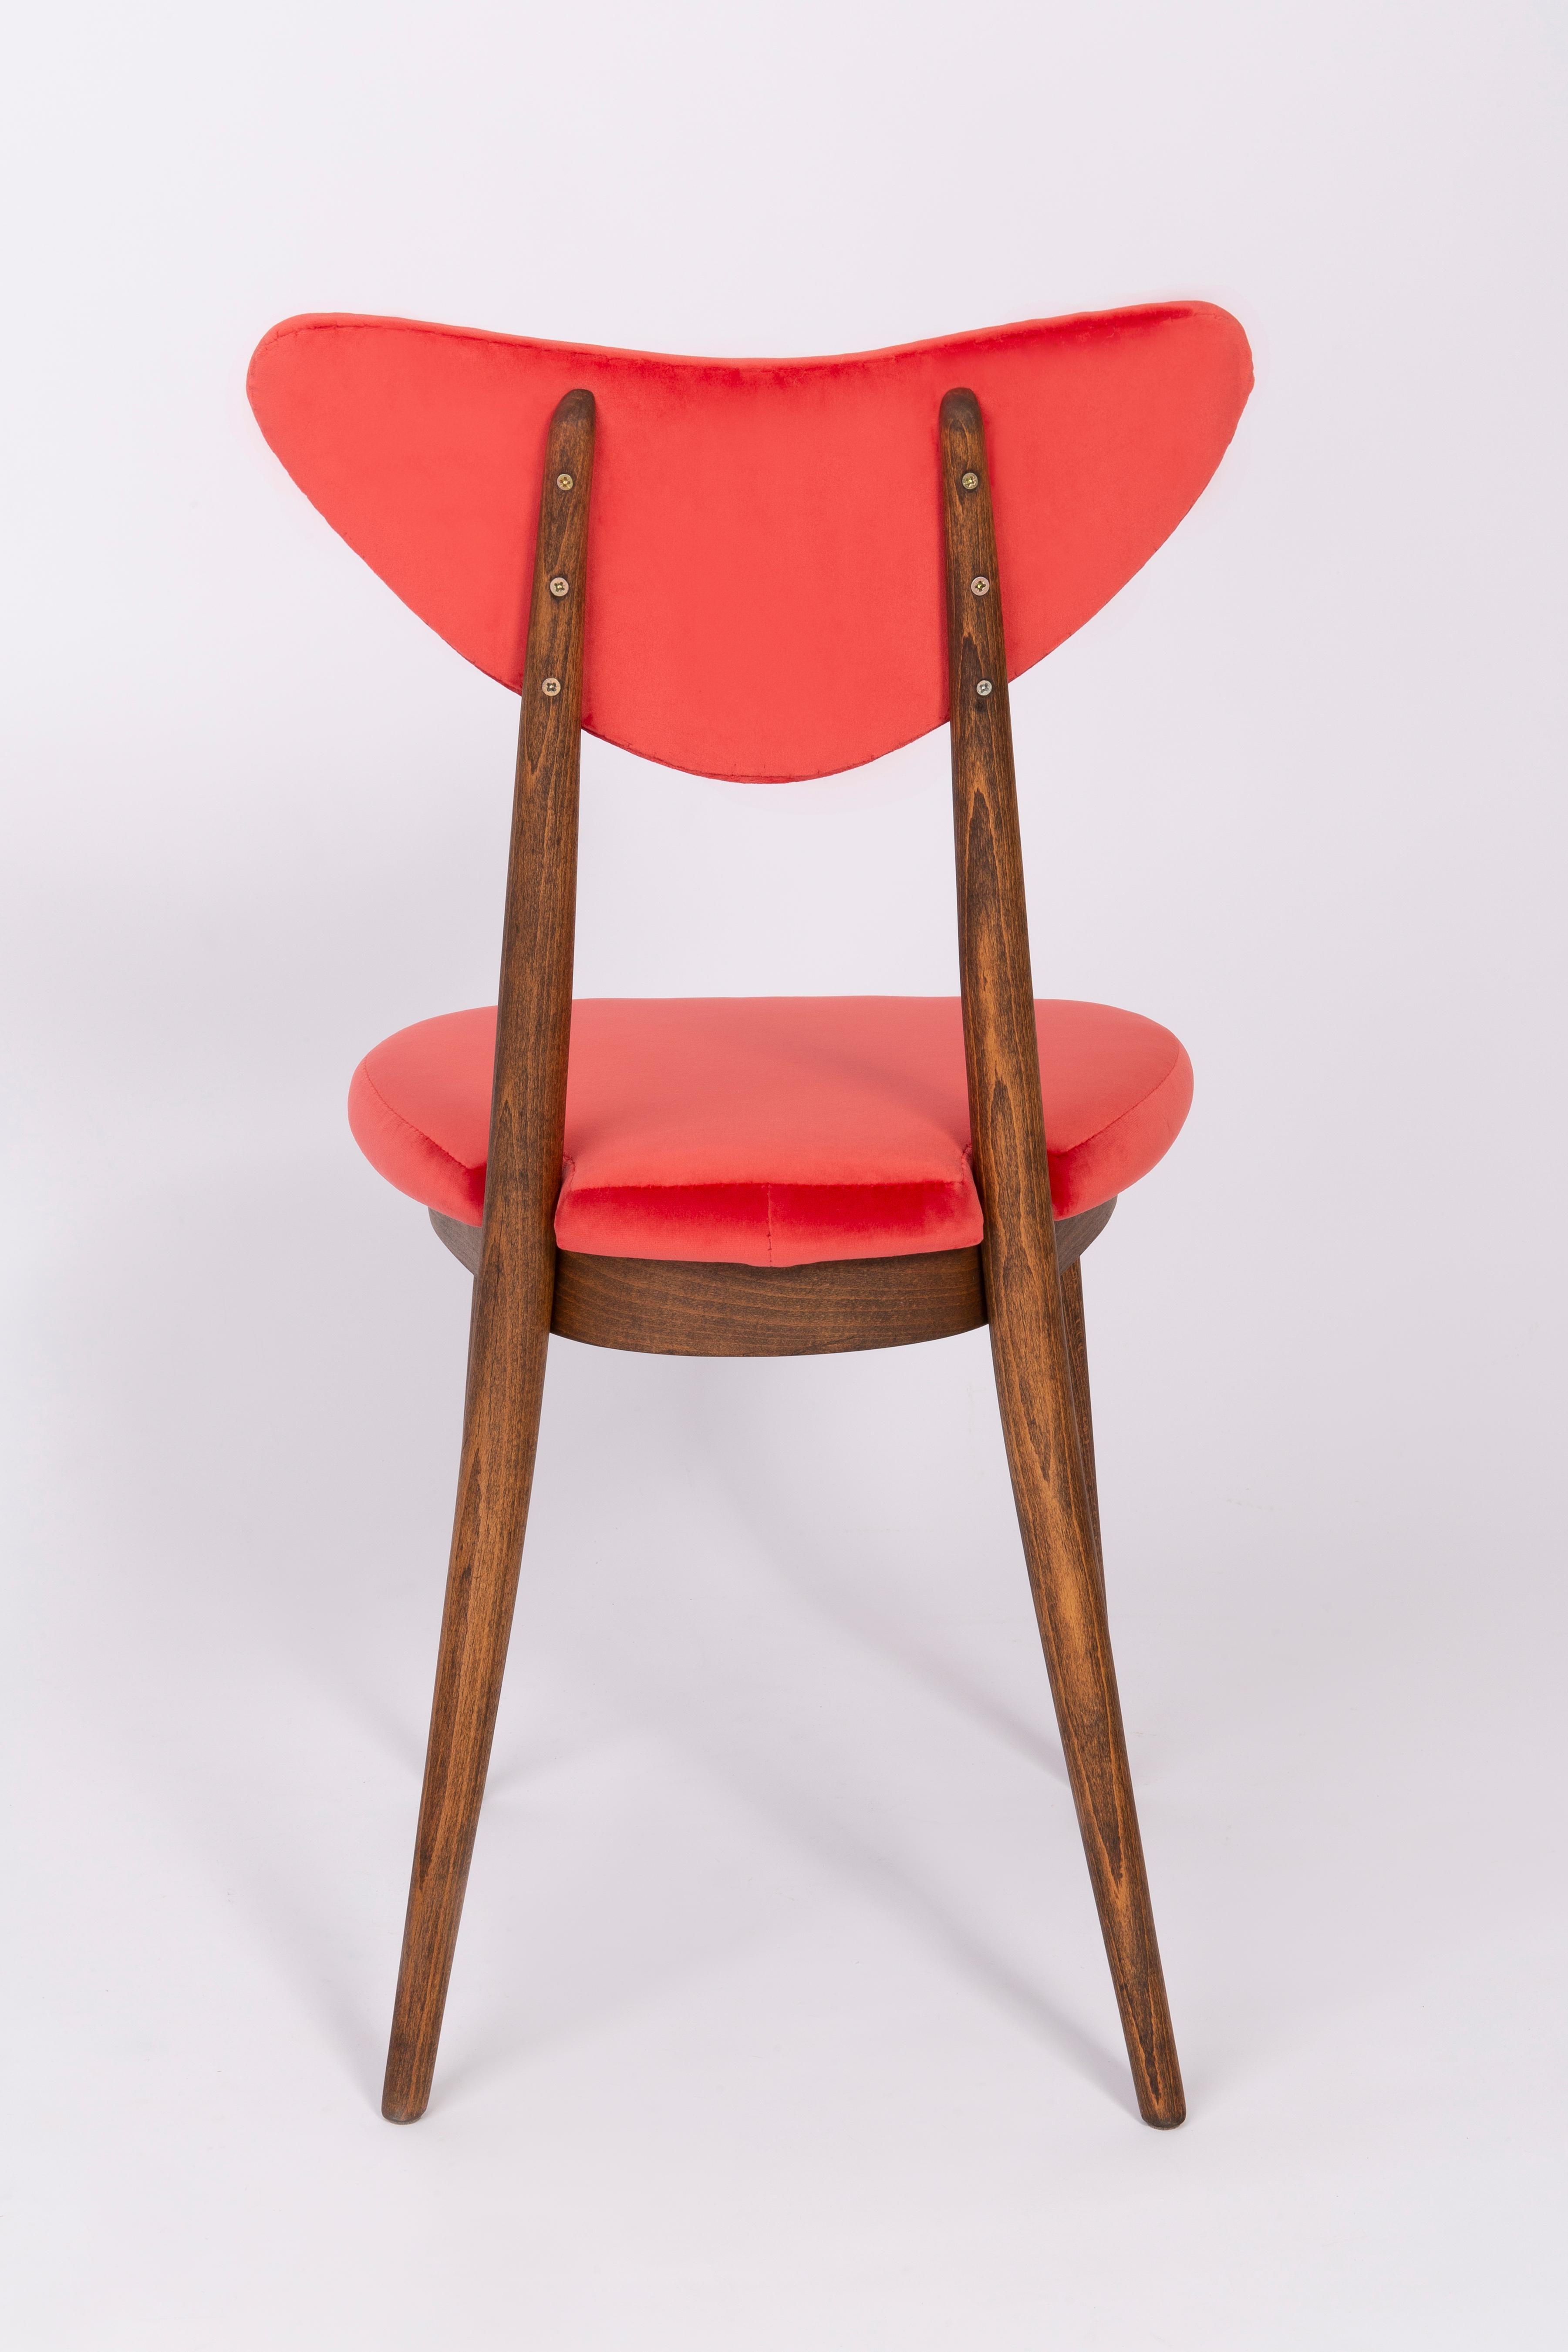 Set of Four Red Heart Chairs, Poland, 1960s For Sale 2